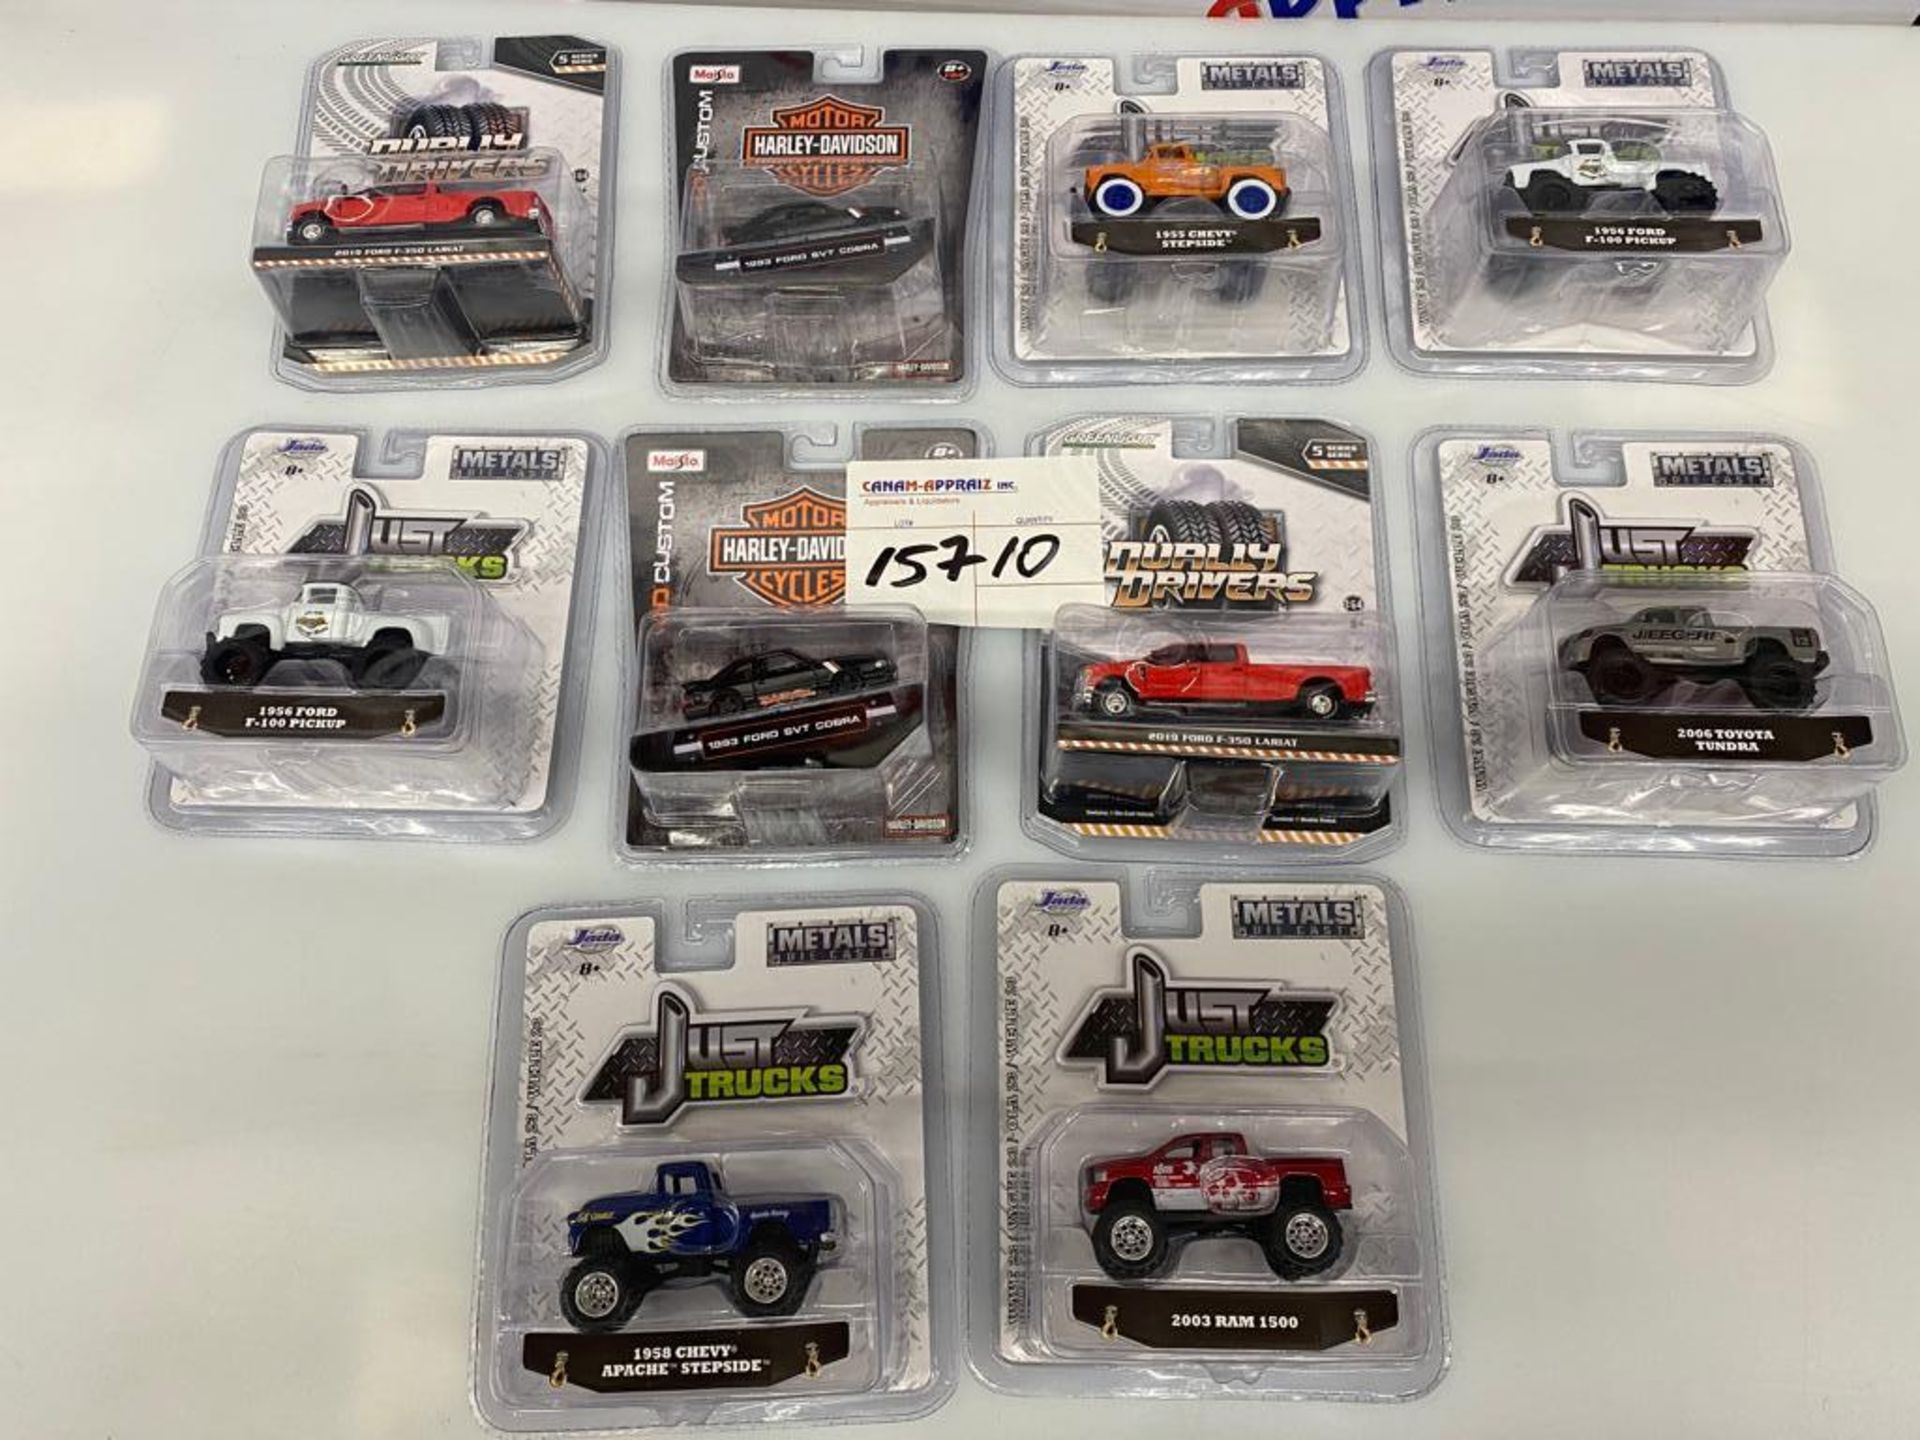 JADA, Greenlight - (Real Cars) 1:64 Scale Die Cast Cars - 10PCS